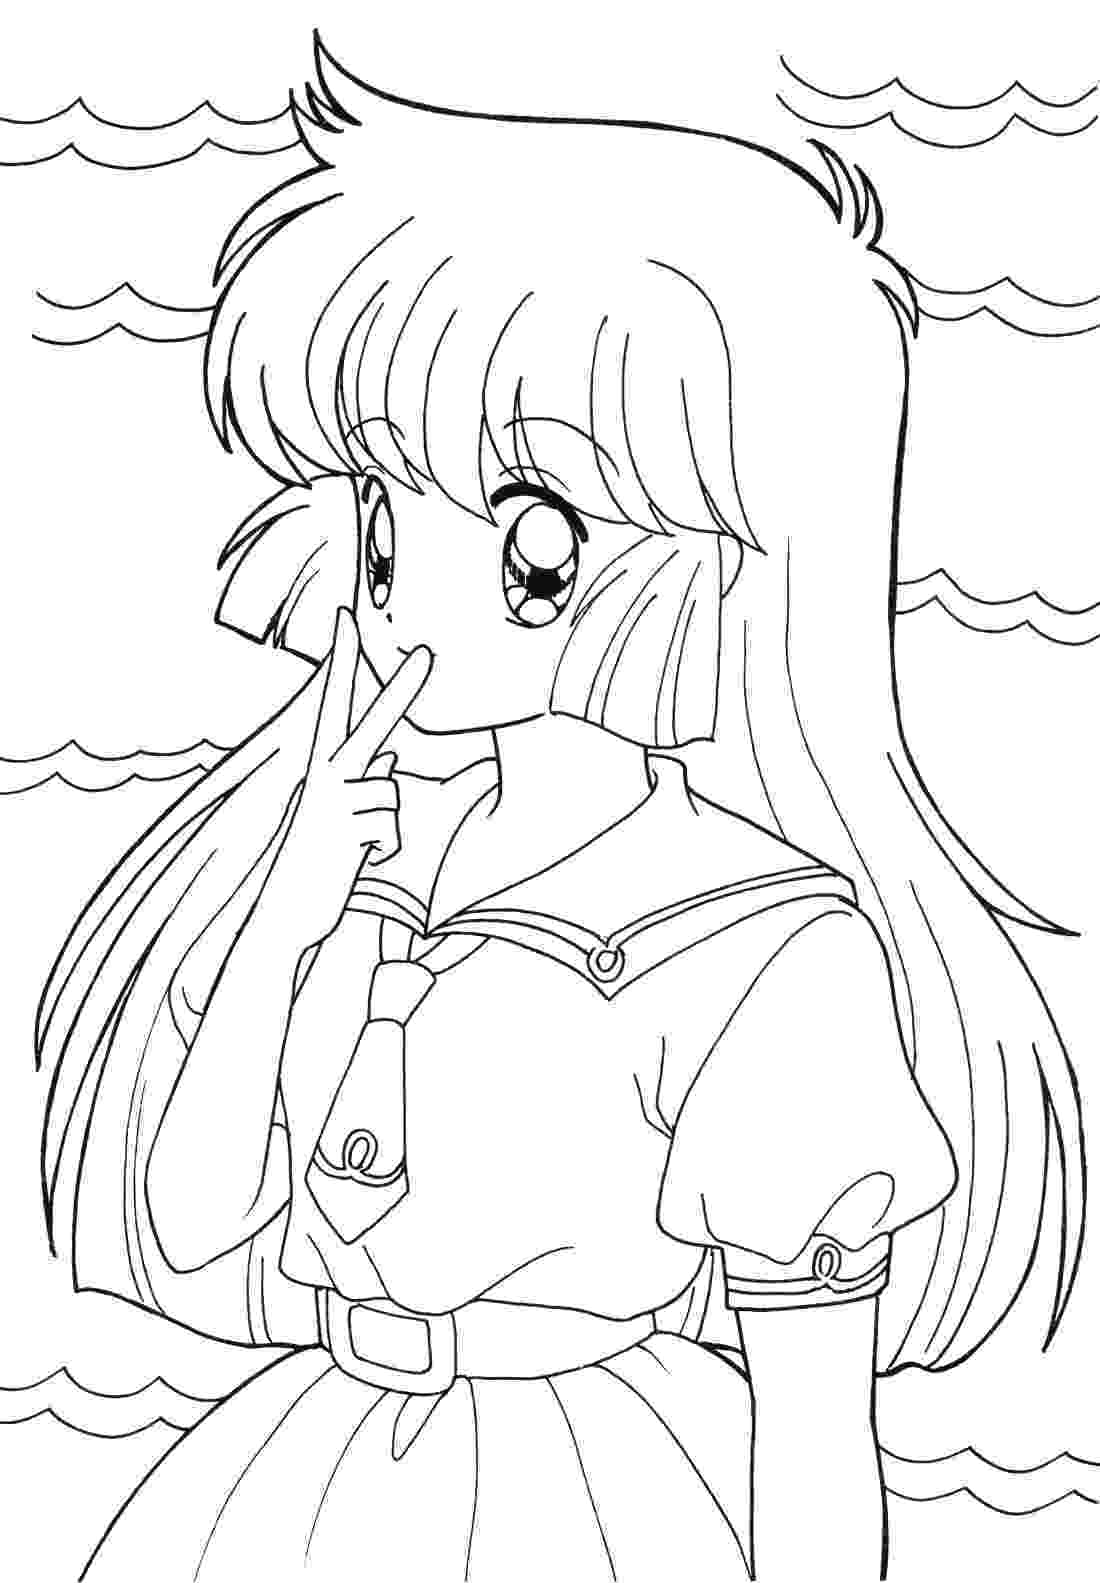 coloring pictures anime anime coloring pages best coloring pages for kids pictures coloring anime 